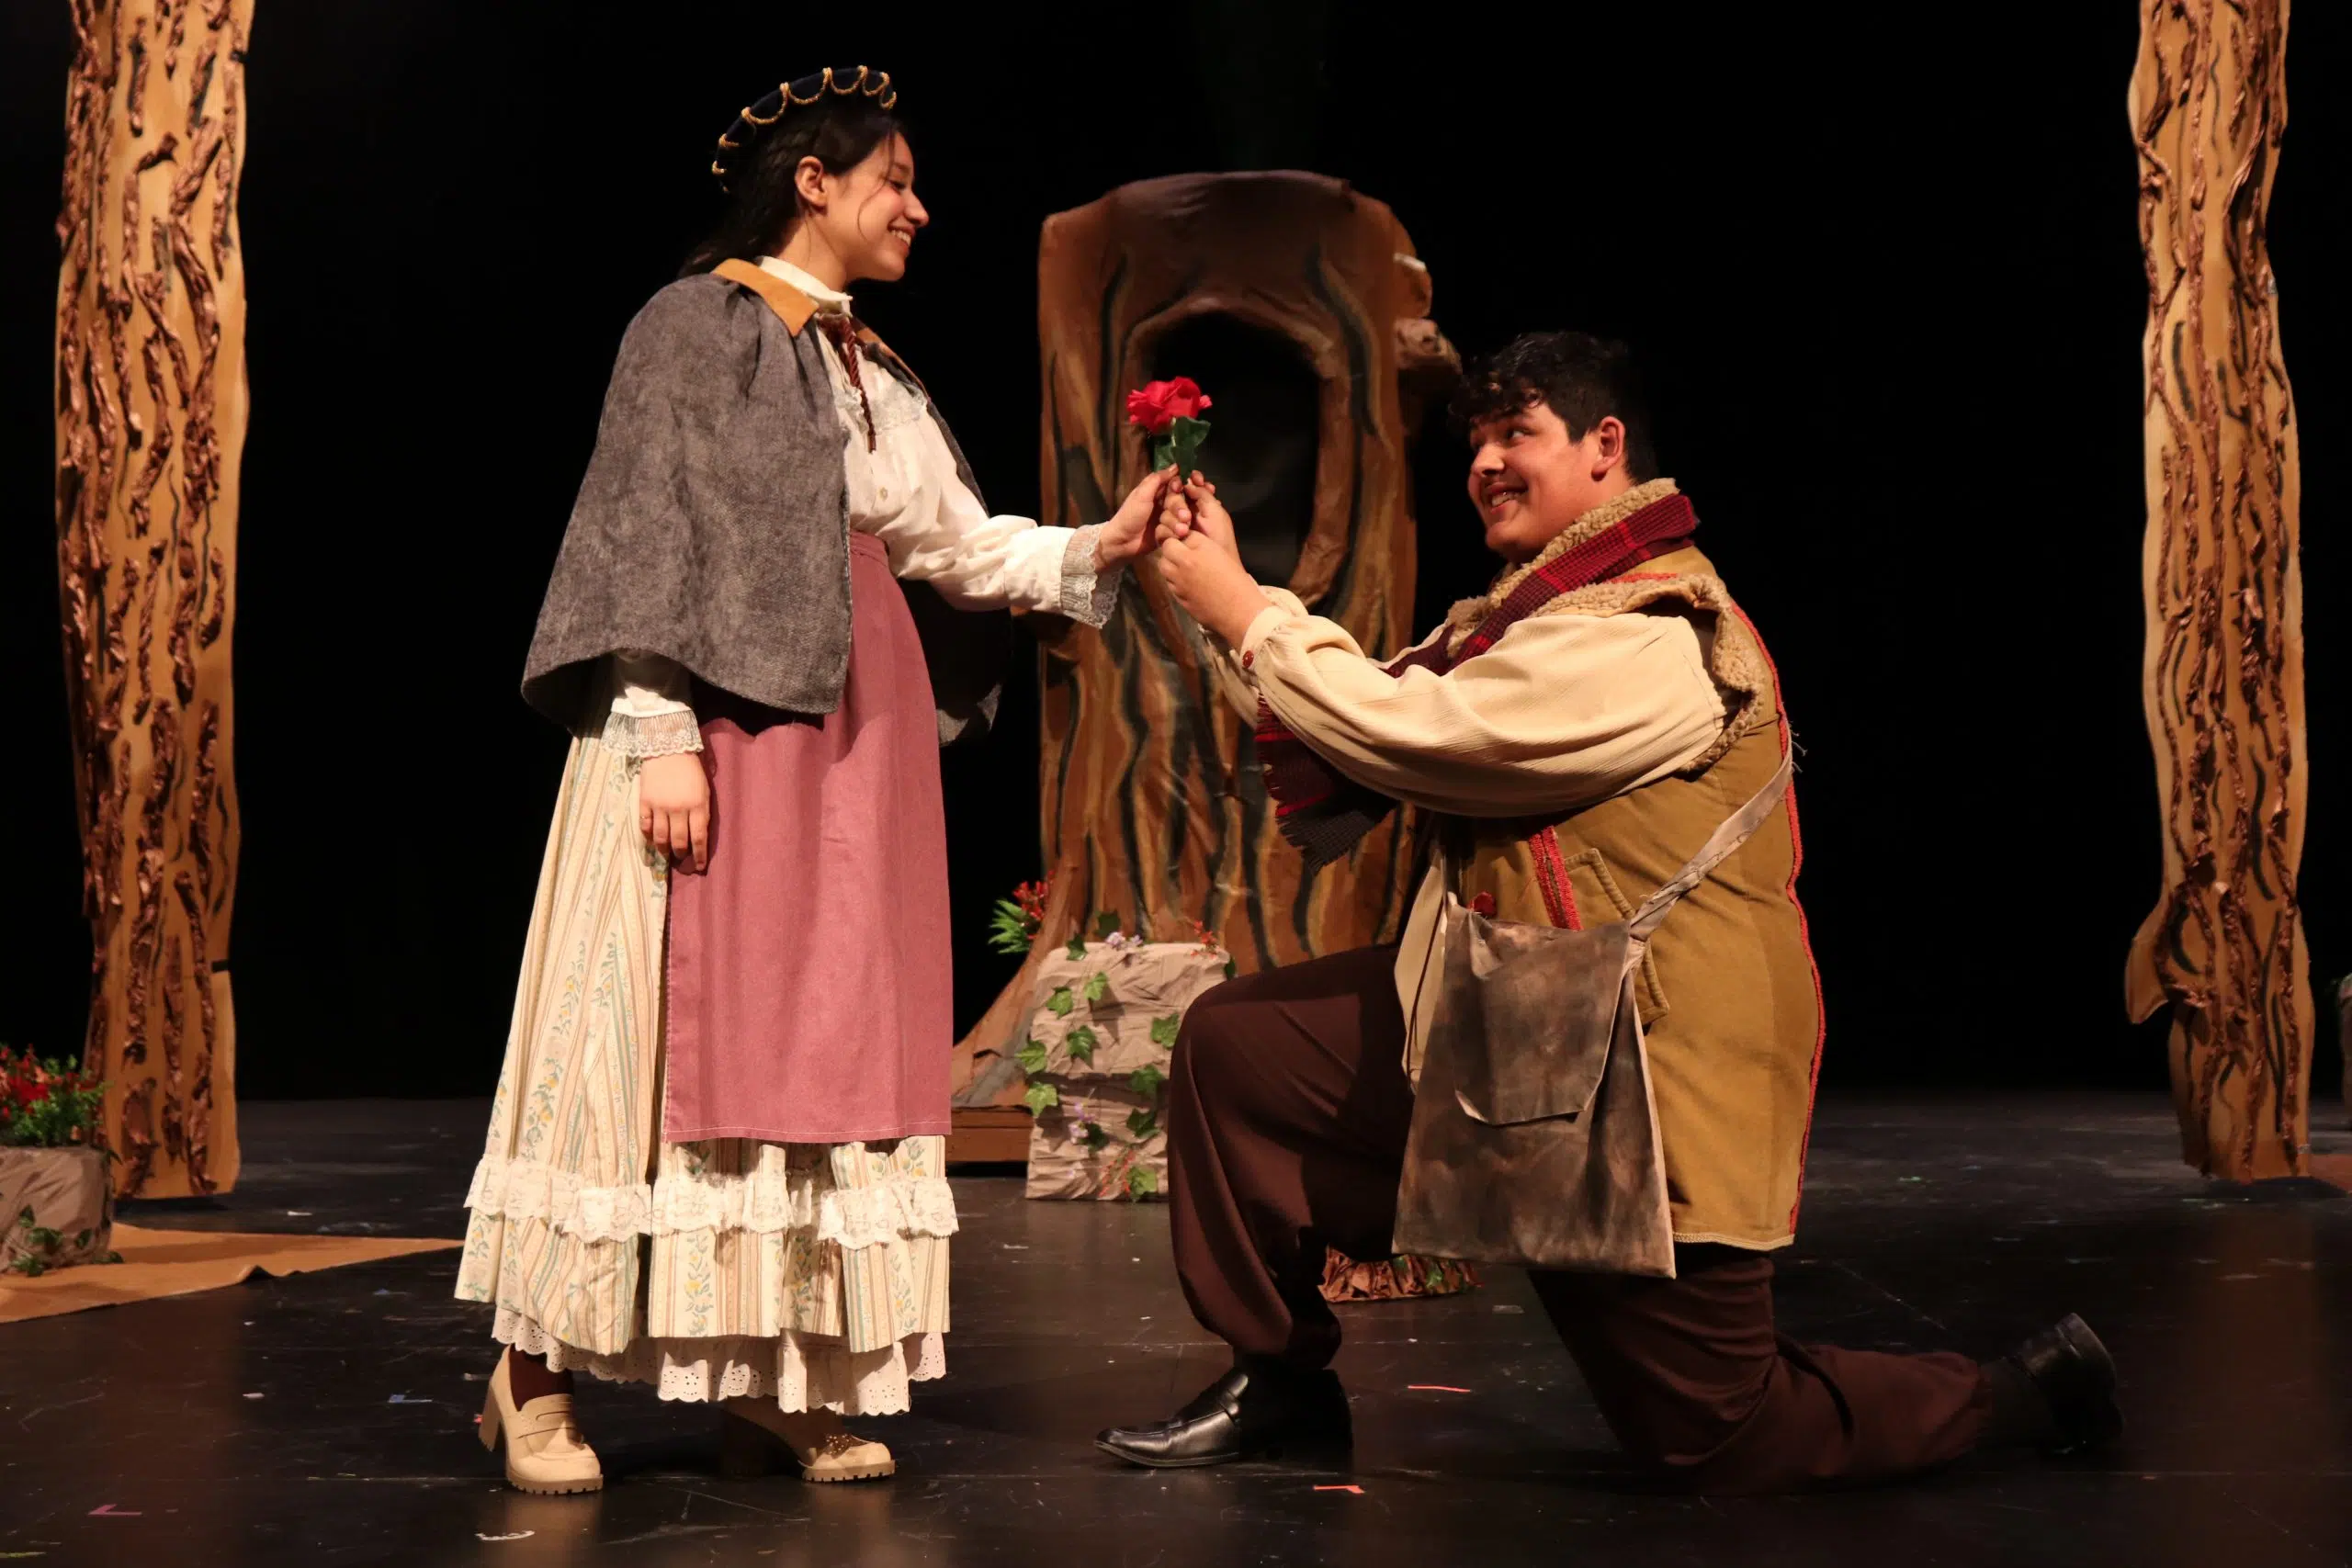 Curtains open for Matador theater production "Into the Woods"